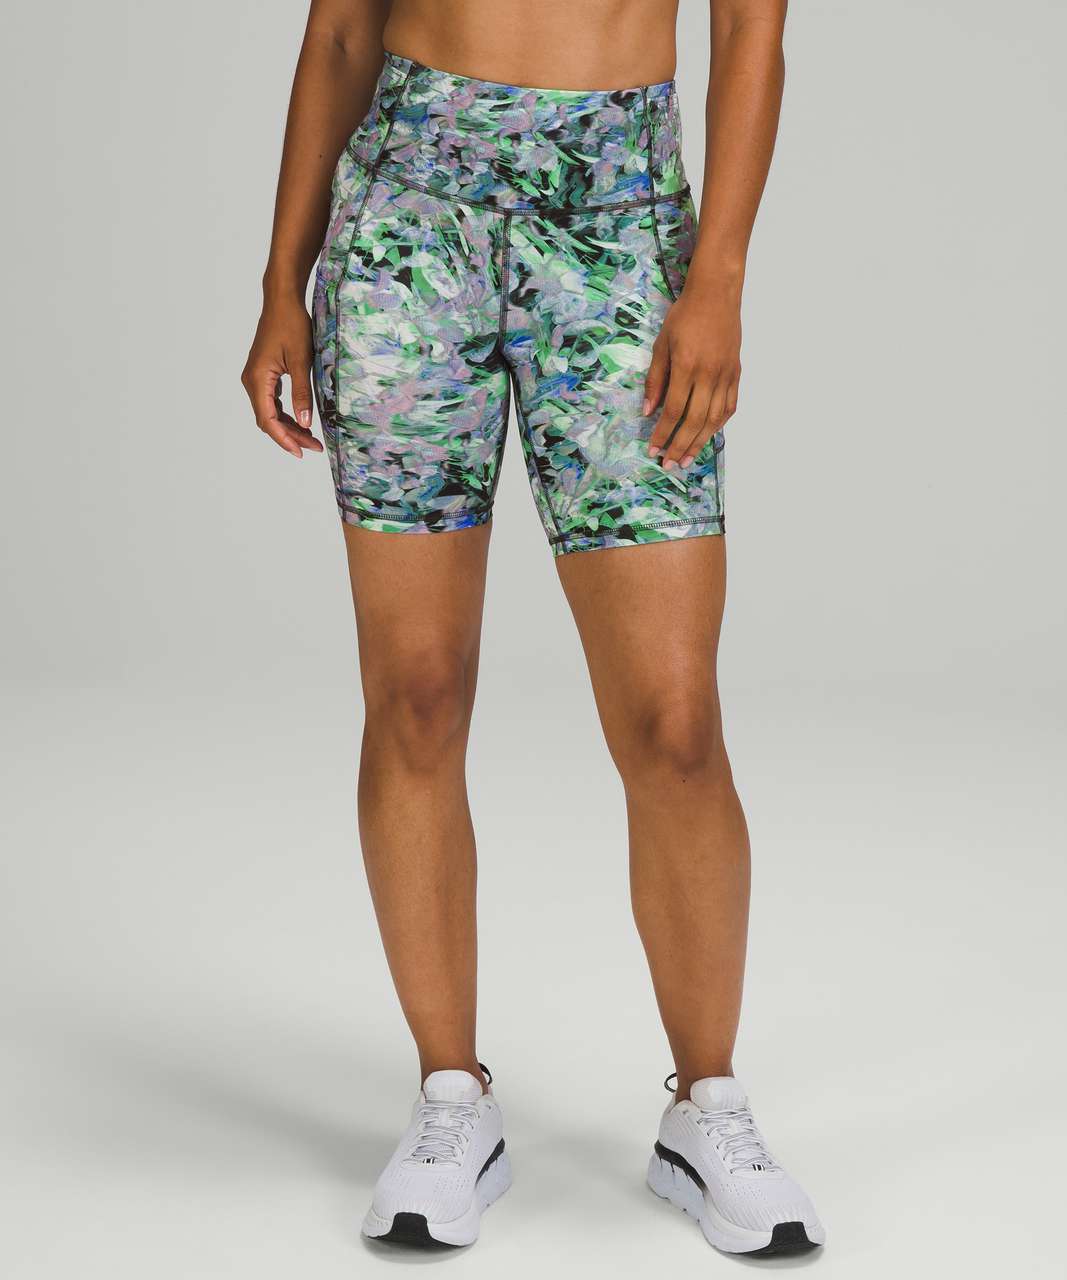 Lululemon Fast And Free Shorts Size 12 - $43 - From Jaden